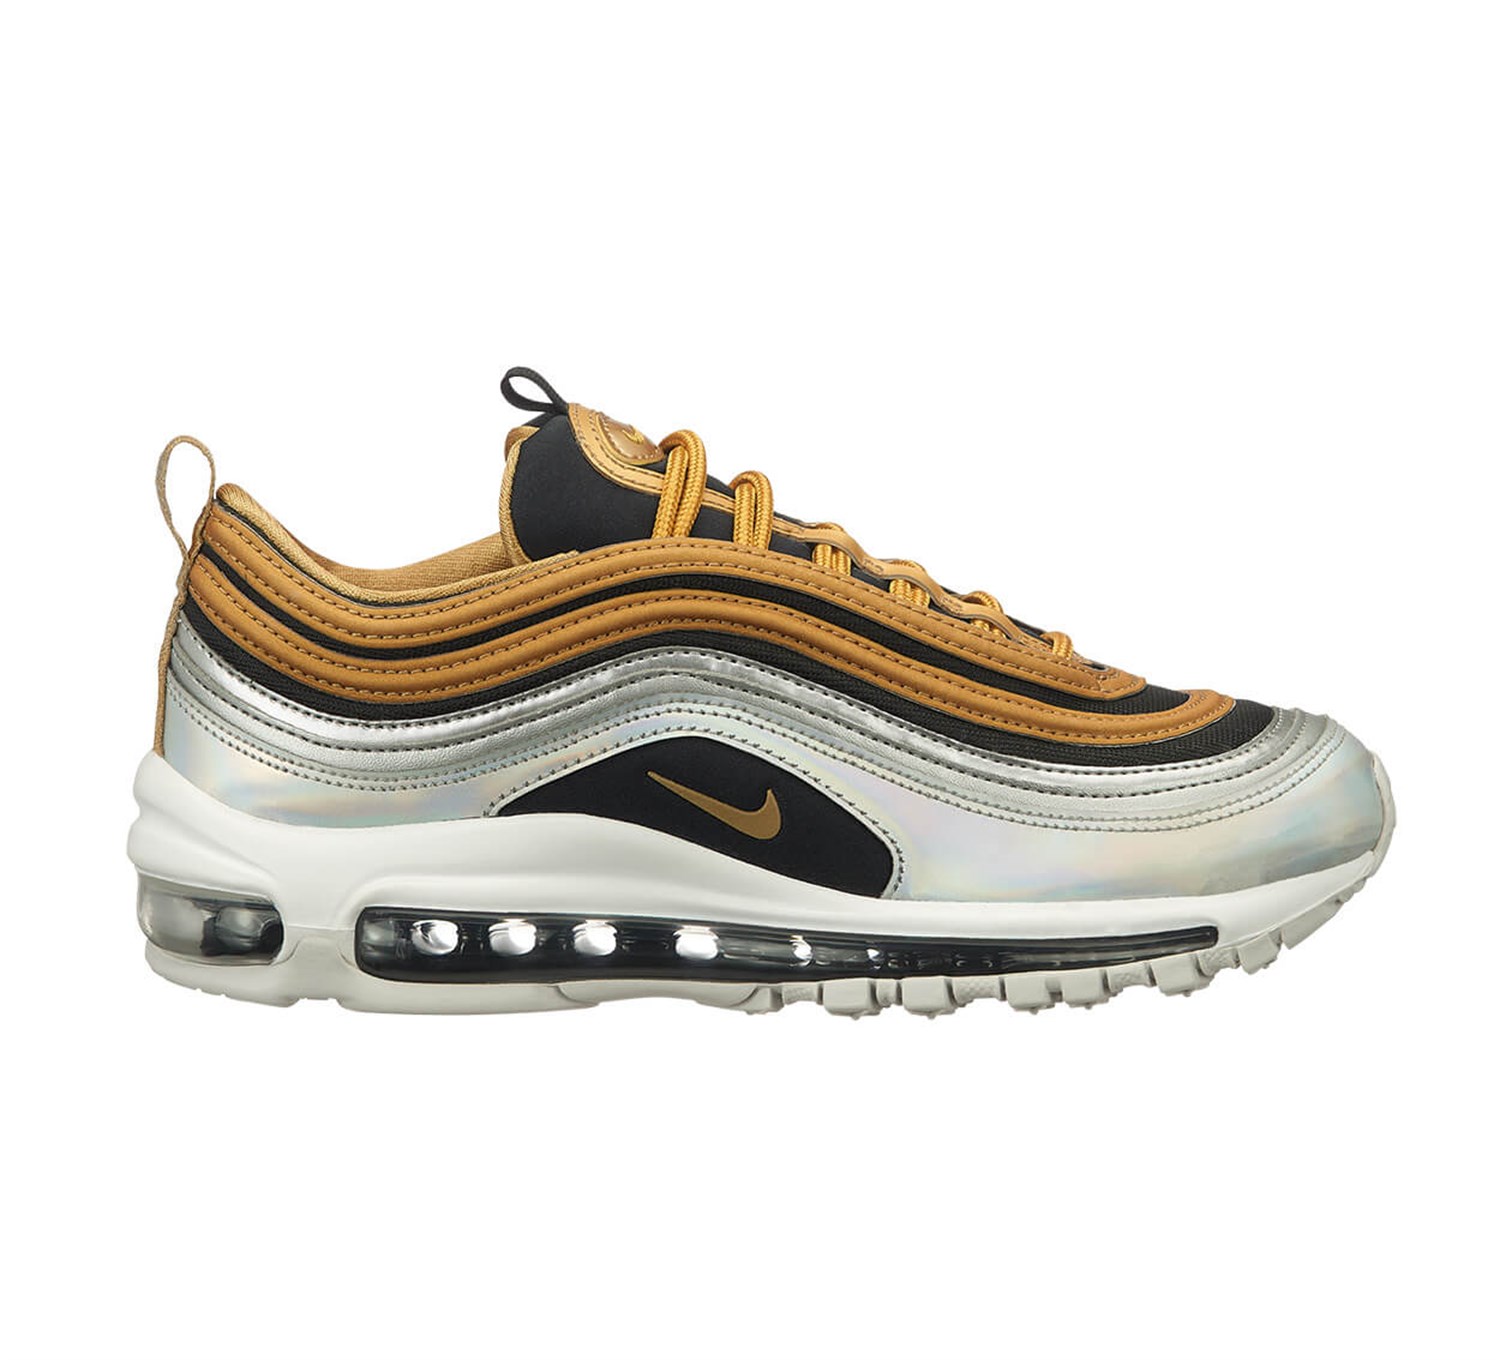 Off White x Nike Air Max 97 Queen Shopee Philippines